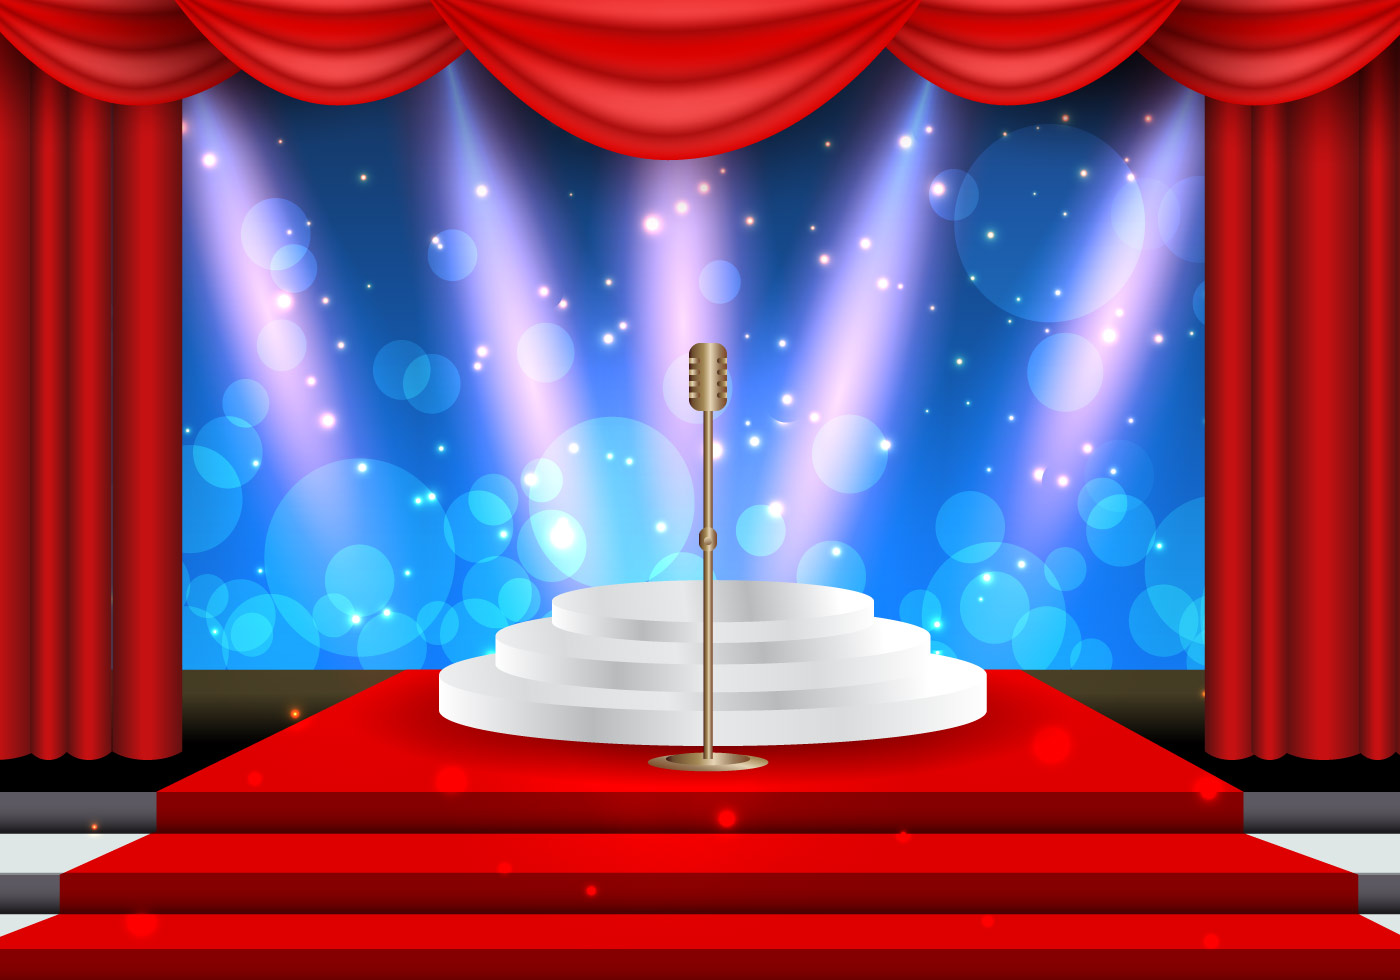 Browse 2,198 incredible Theater Lights vectors, icons, clipart graphics, an...